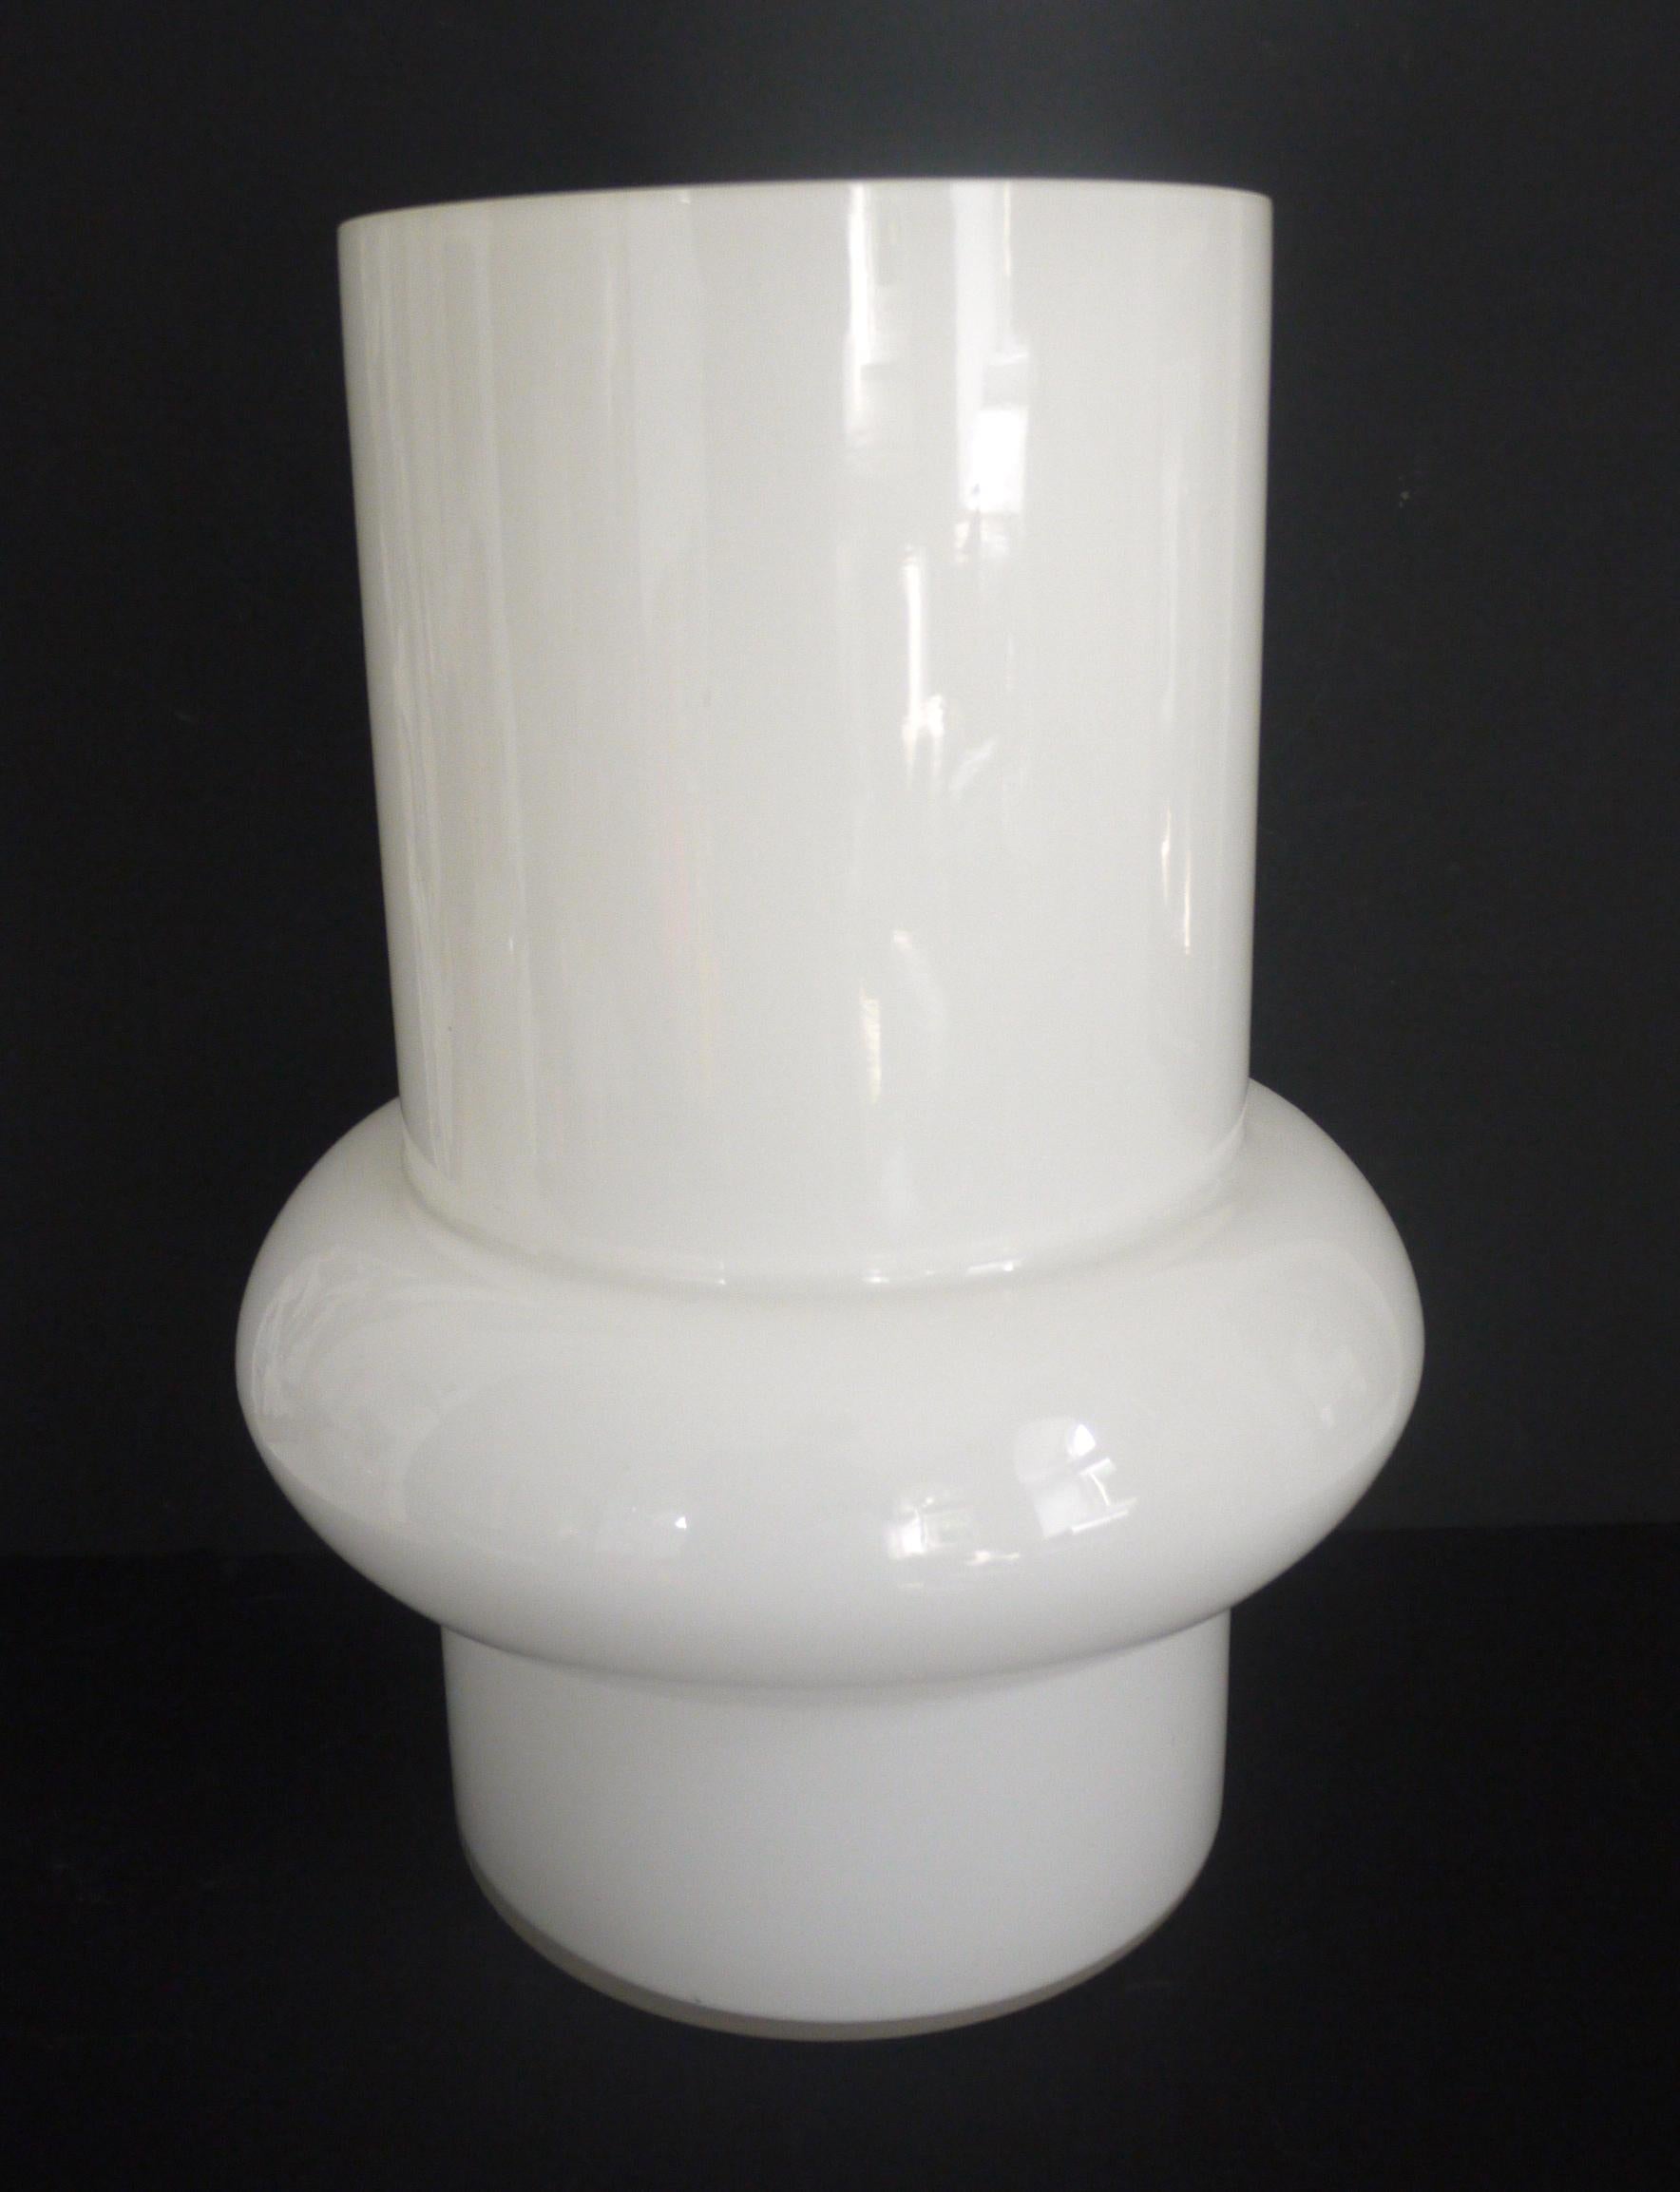 Modernist Scandinavian/Murano Space Age White Glass Vases from Late 1950s-1960s For Sale 4